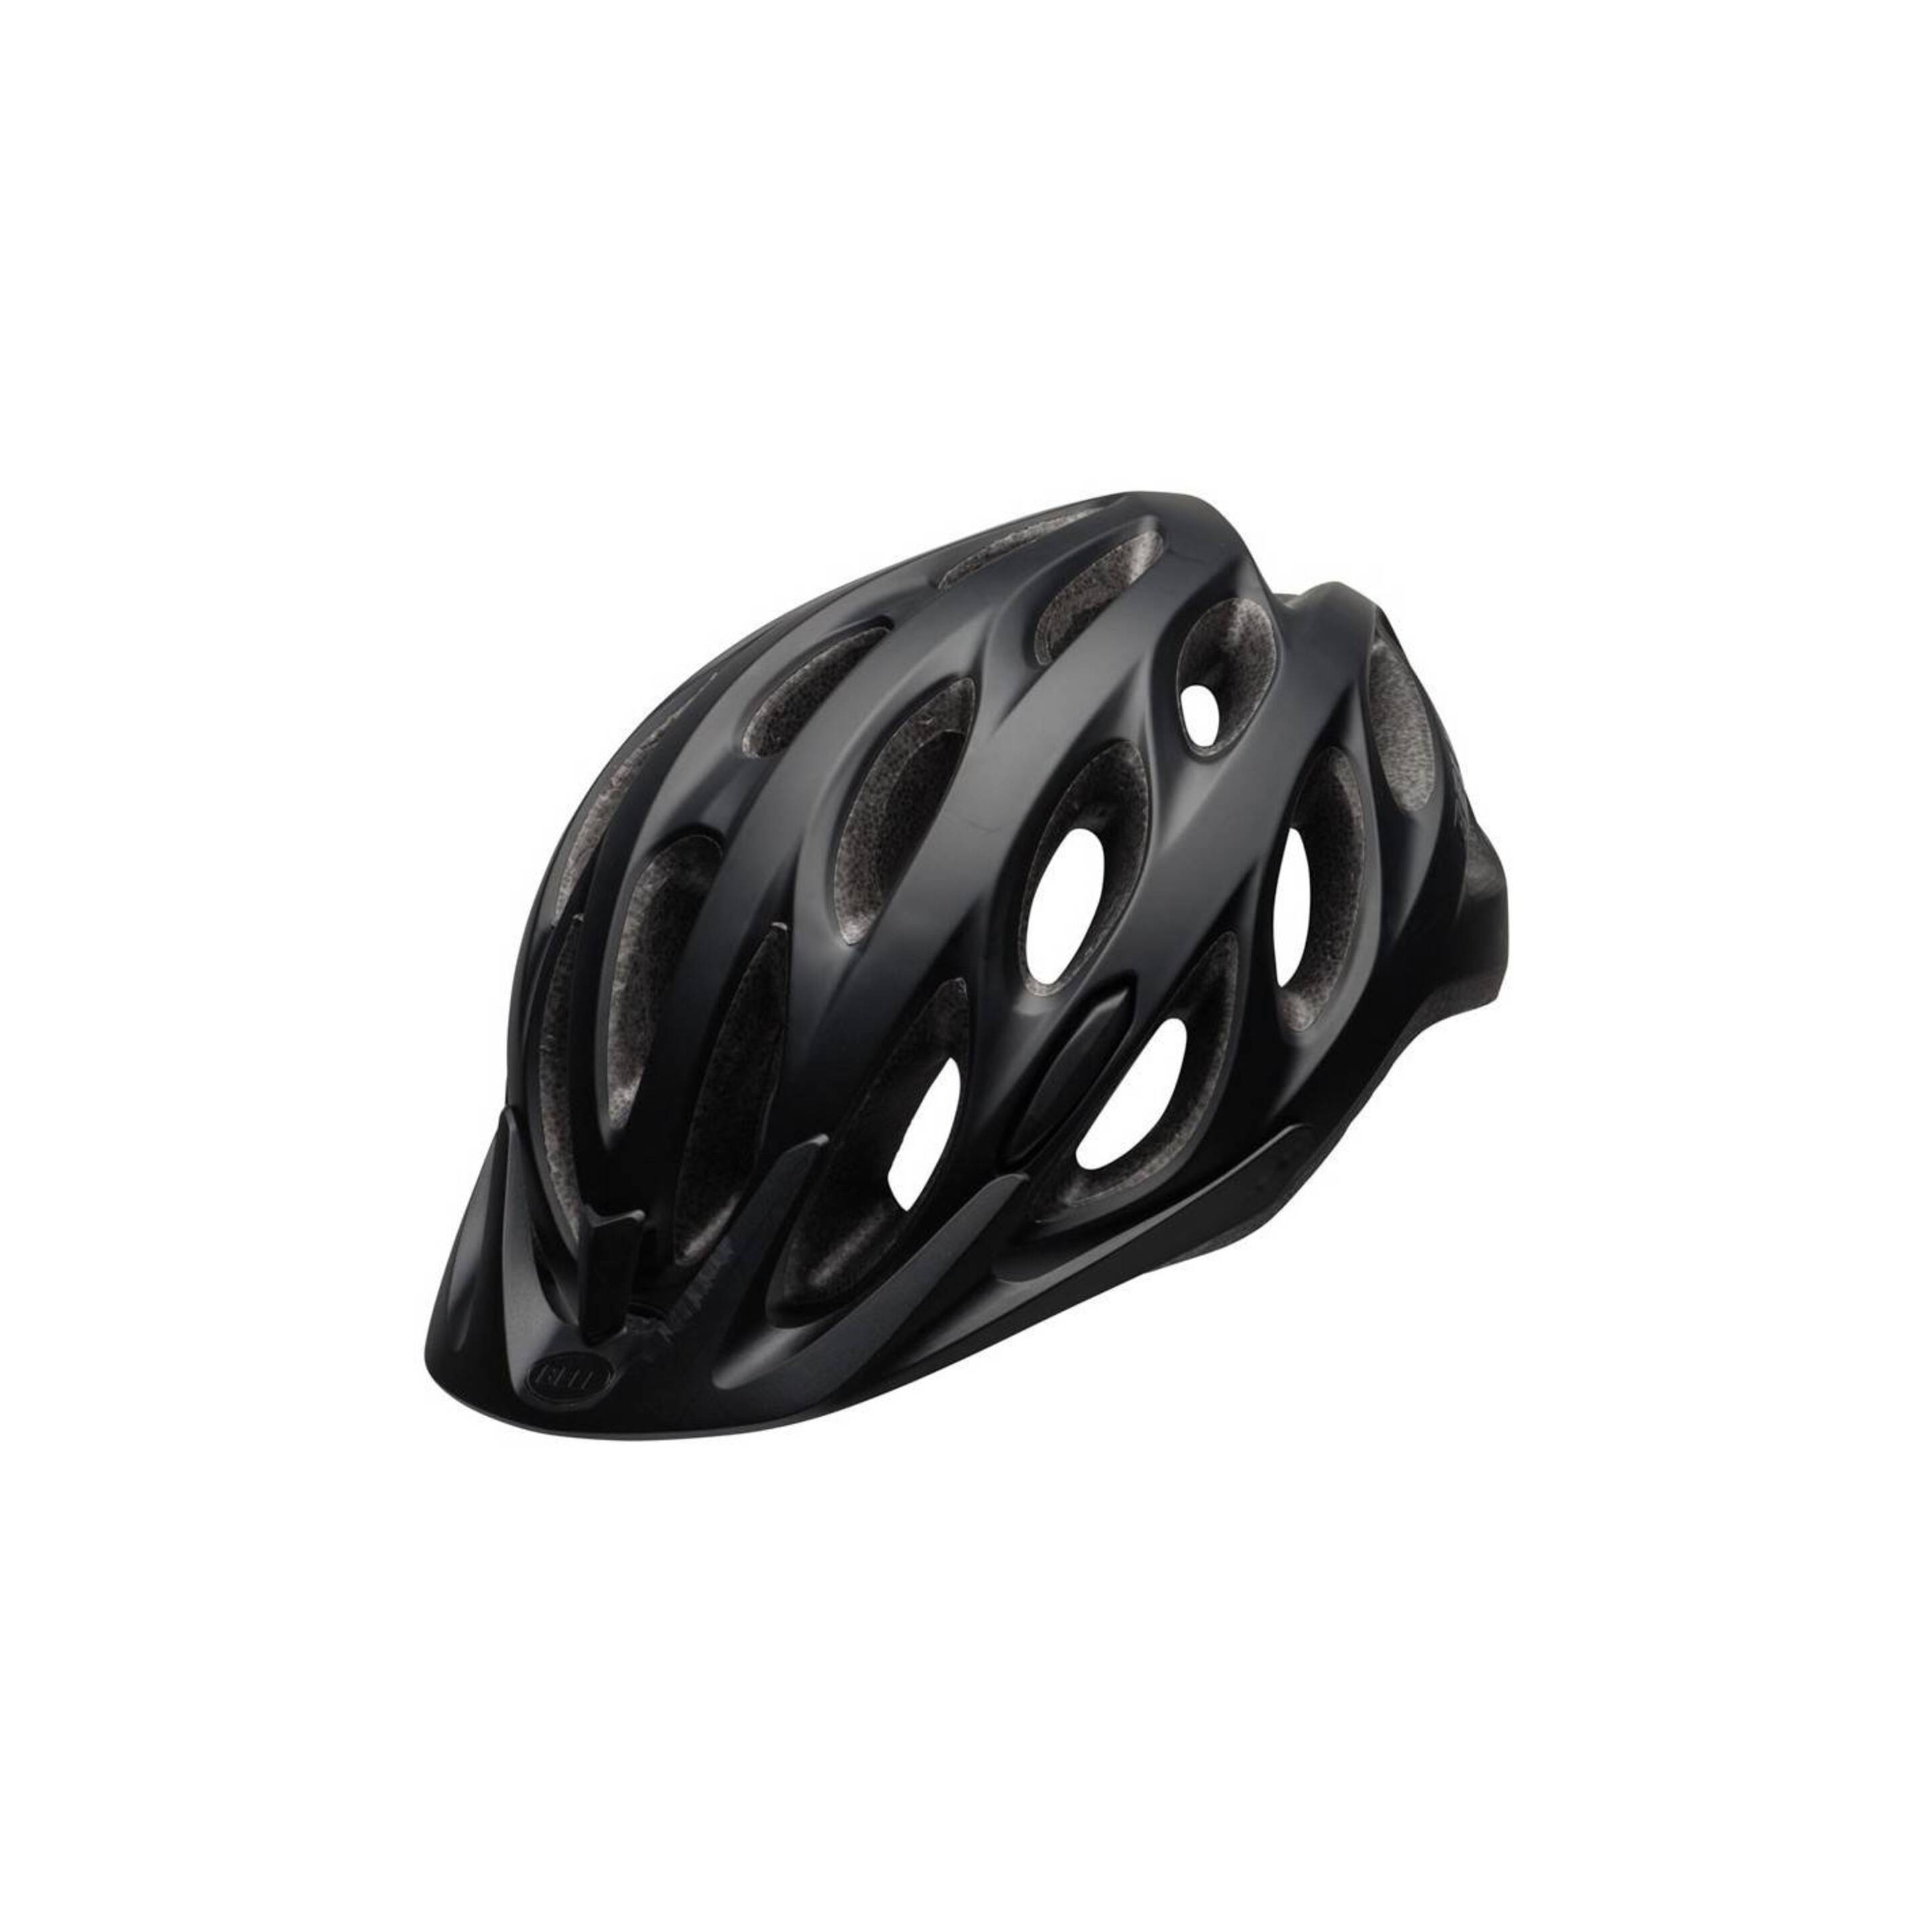 Capacete Ciclismo Bell Tracker - negro - 